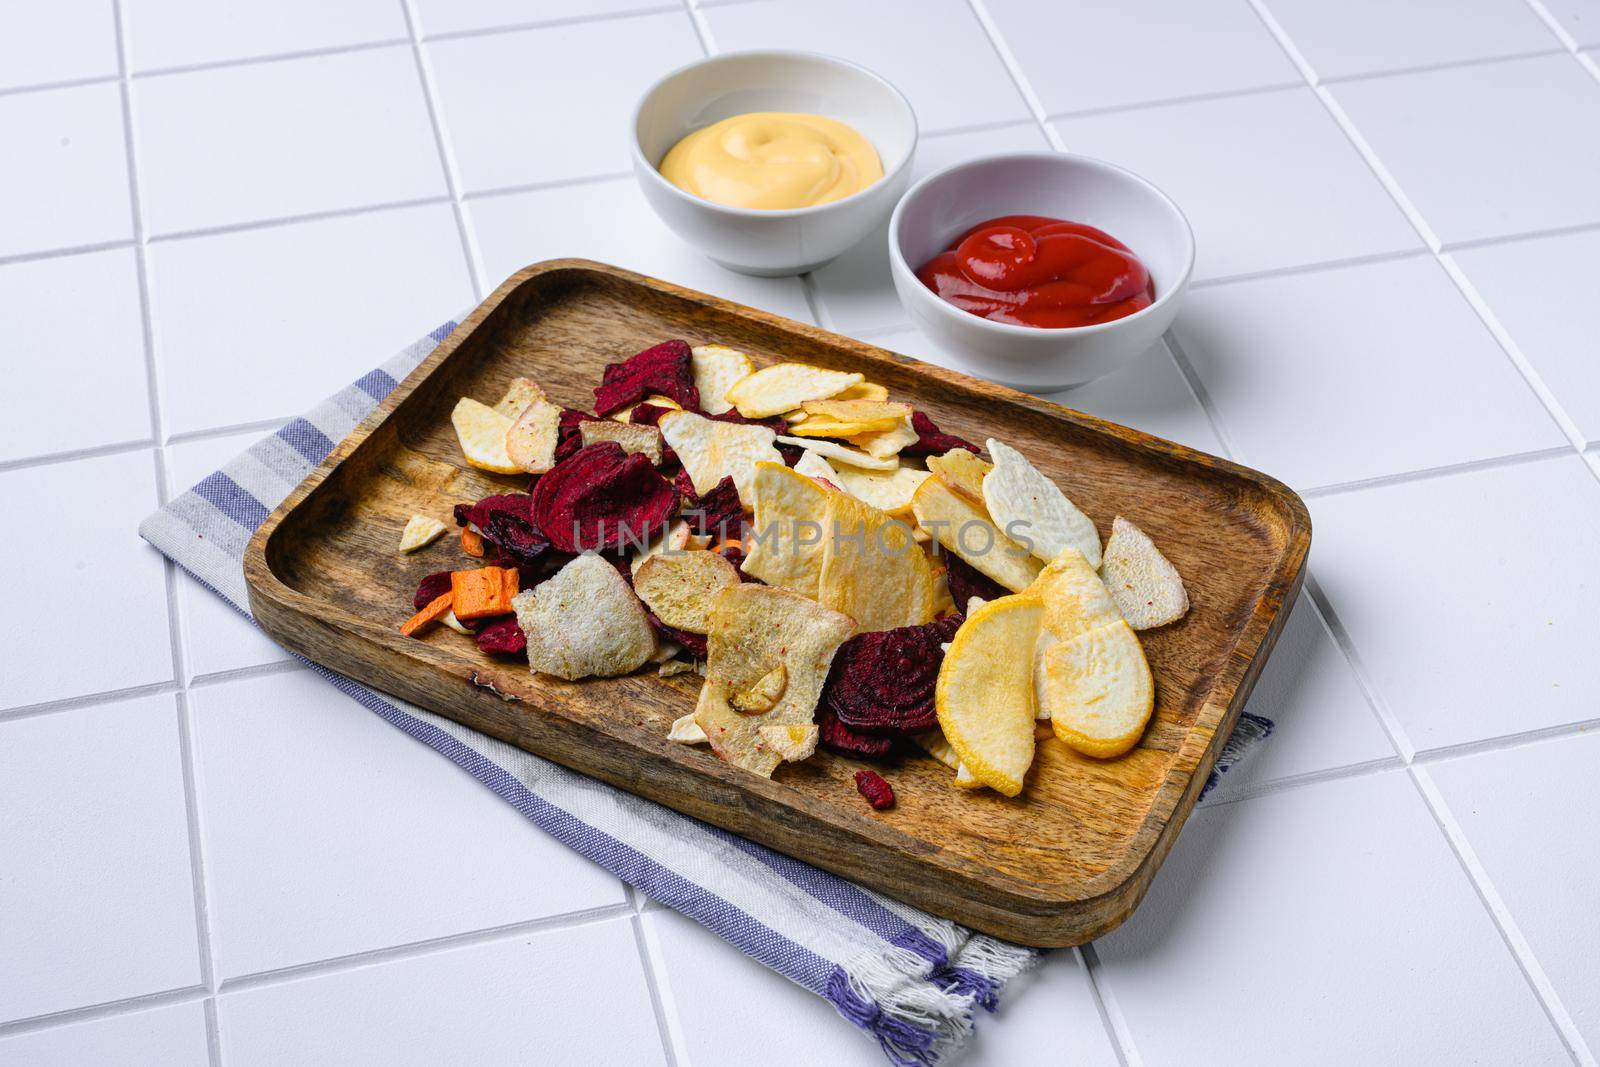 Dried vegetables chips from carrot, beet, parsnip and other vegetables, on white ceramic squared tile table background, with copy space for text by Ilianesolenyi